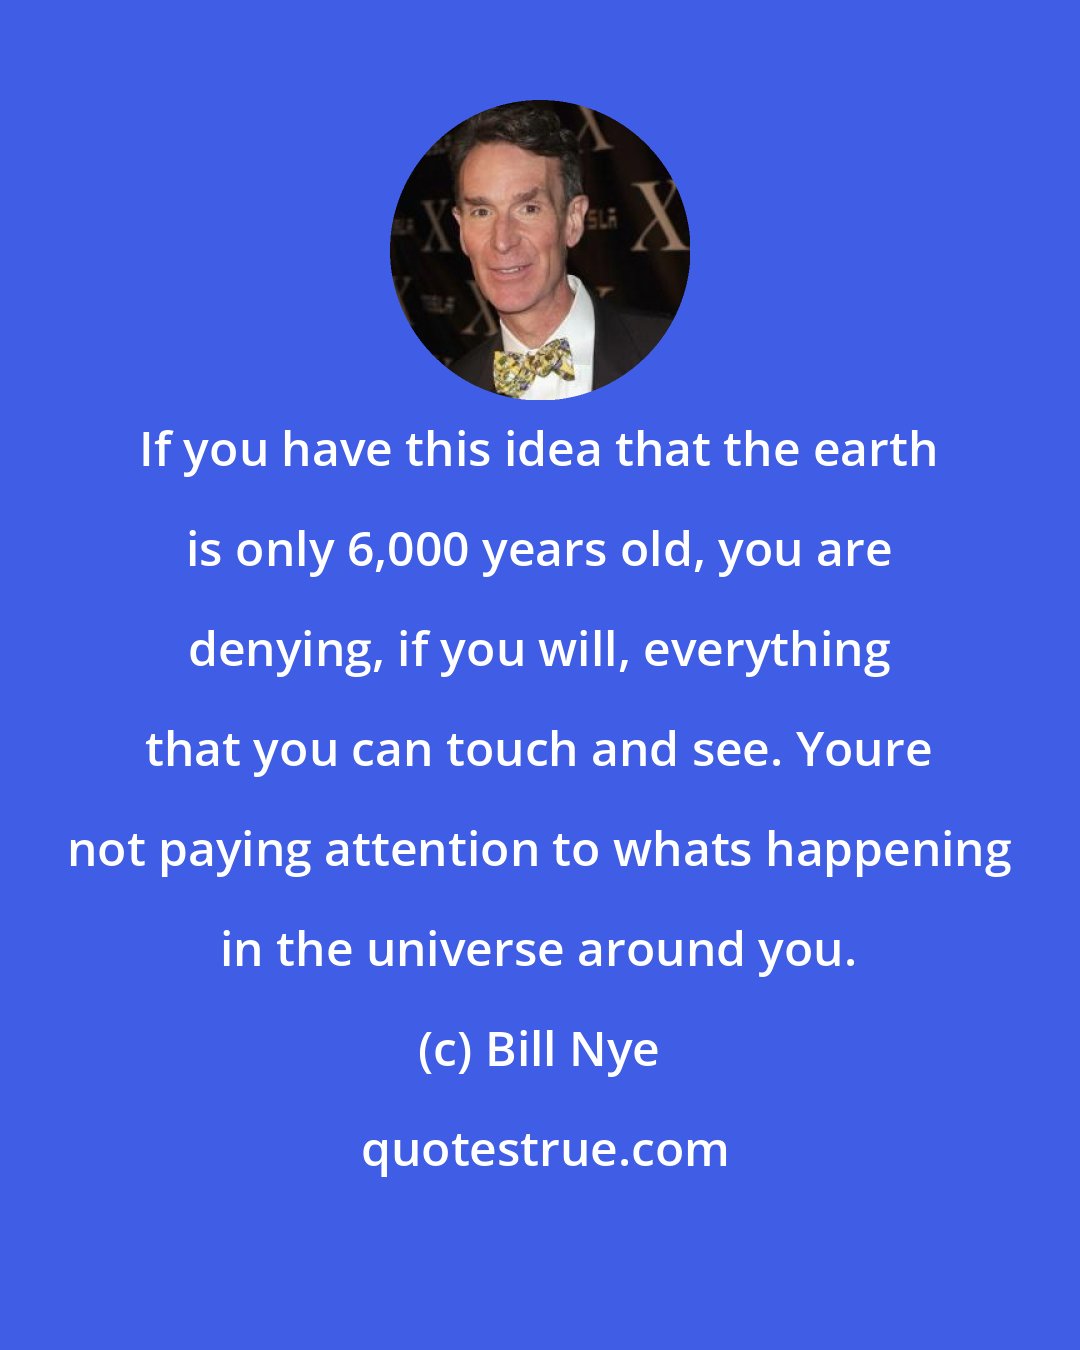 Bill Nye: If you have this idea that the earth is only 6,000 years old, you are denying, if you will, everything that you can touch and see. Youre not paying attention to whats happening in the universe around you.